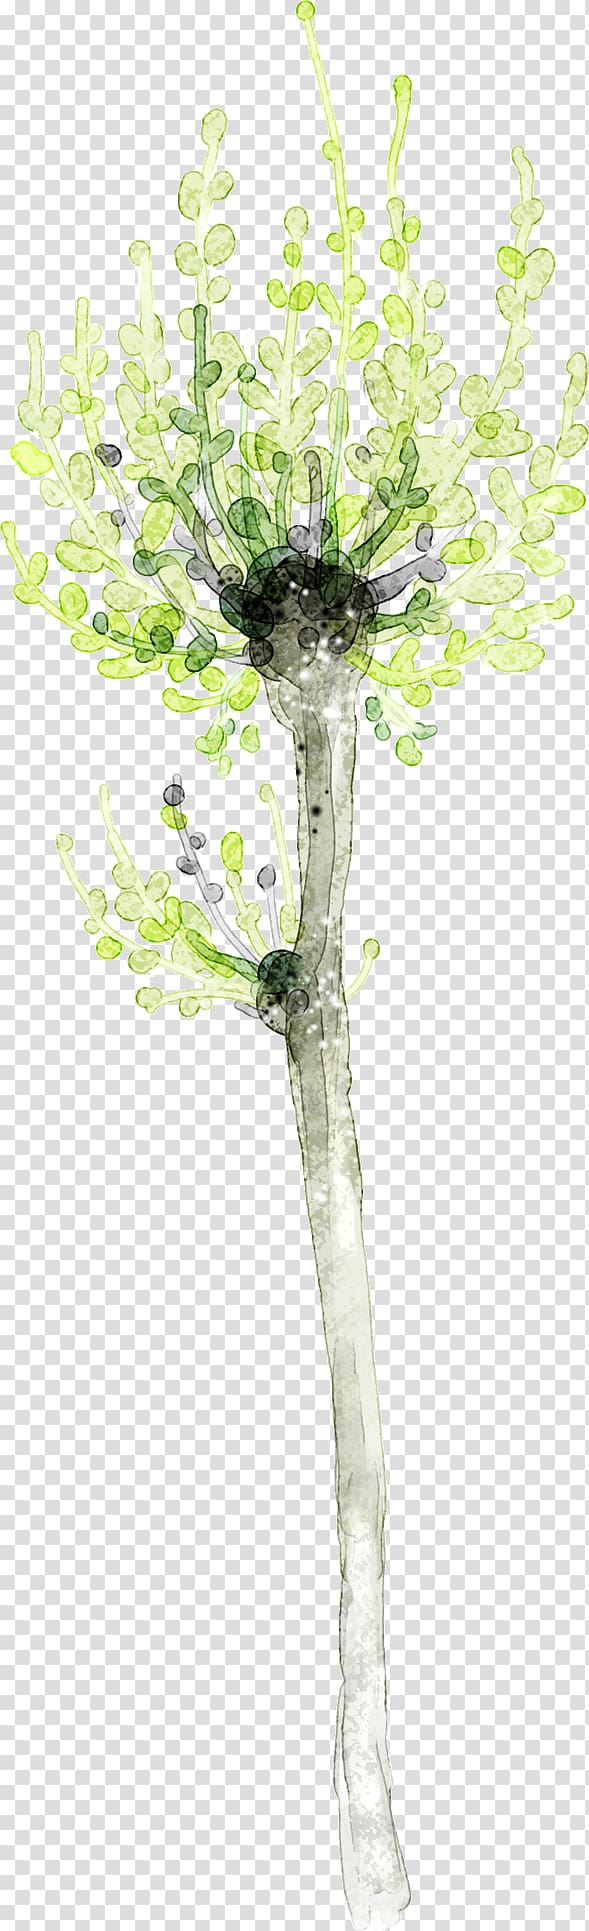 Paper Leaf Twig Tree Printing, Fresh green leaves of the tree transparent background PNG clipart